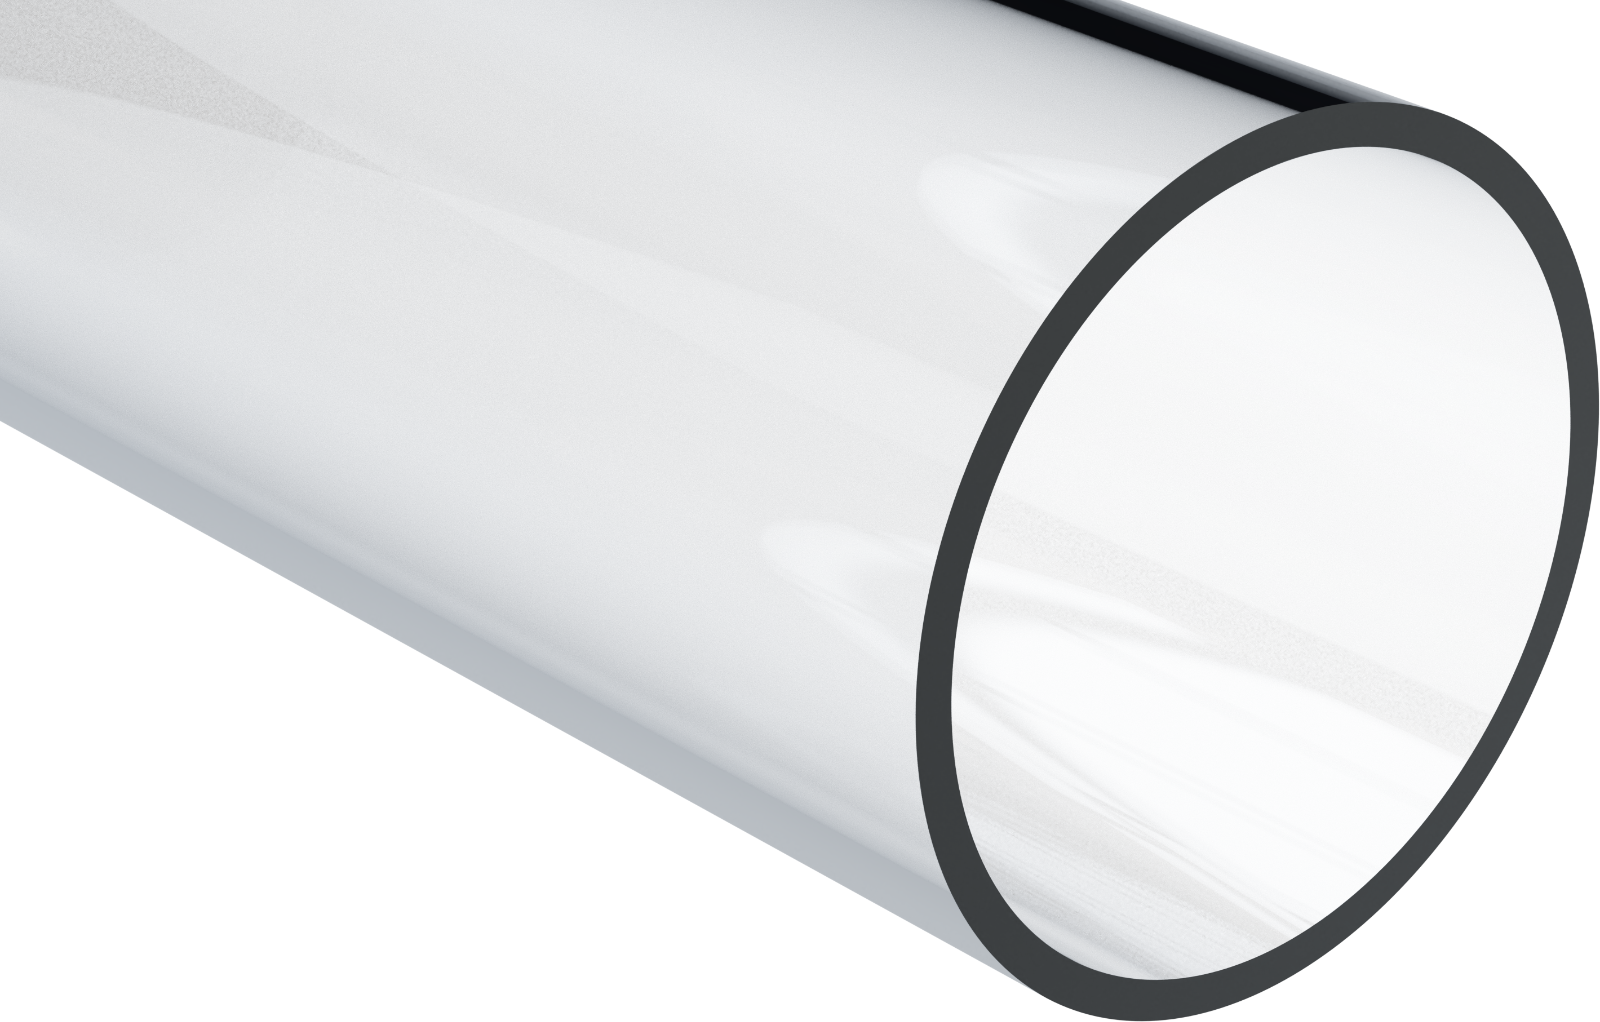 Acrylic Round Tube (Extruded) Clear, 2-3/4" ID x 3" OD, 36" Length (Pack of 2) Plastic-Craft Products AC46545